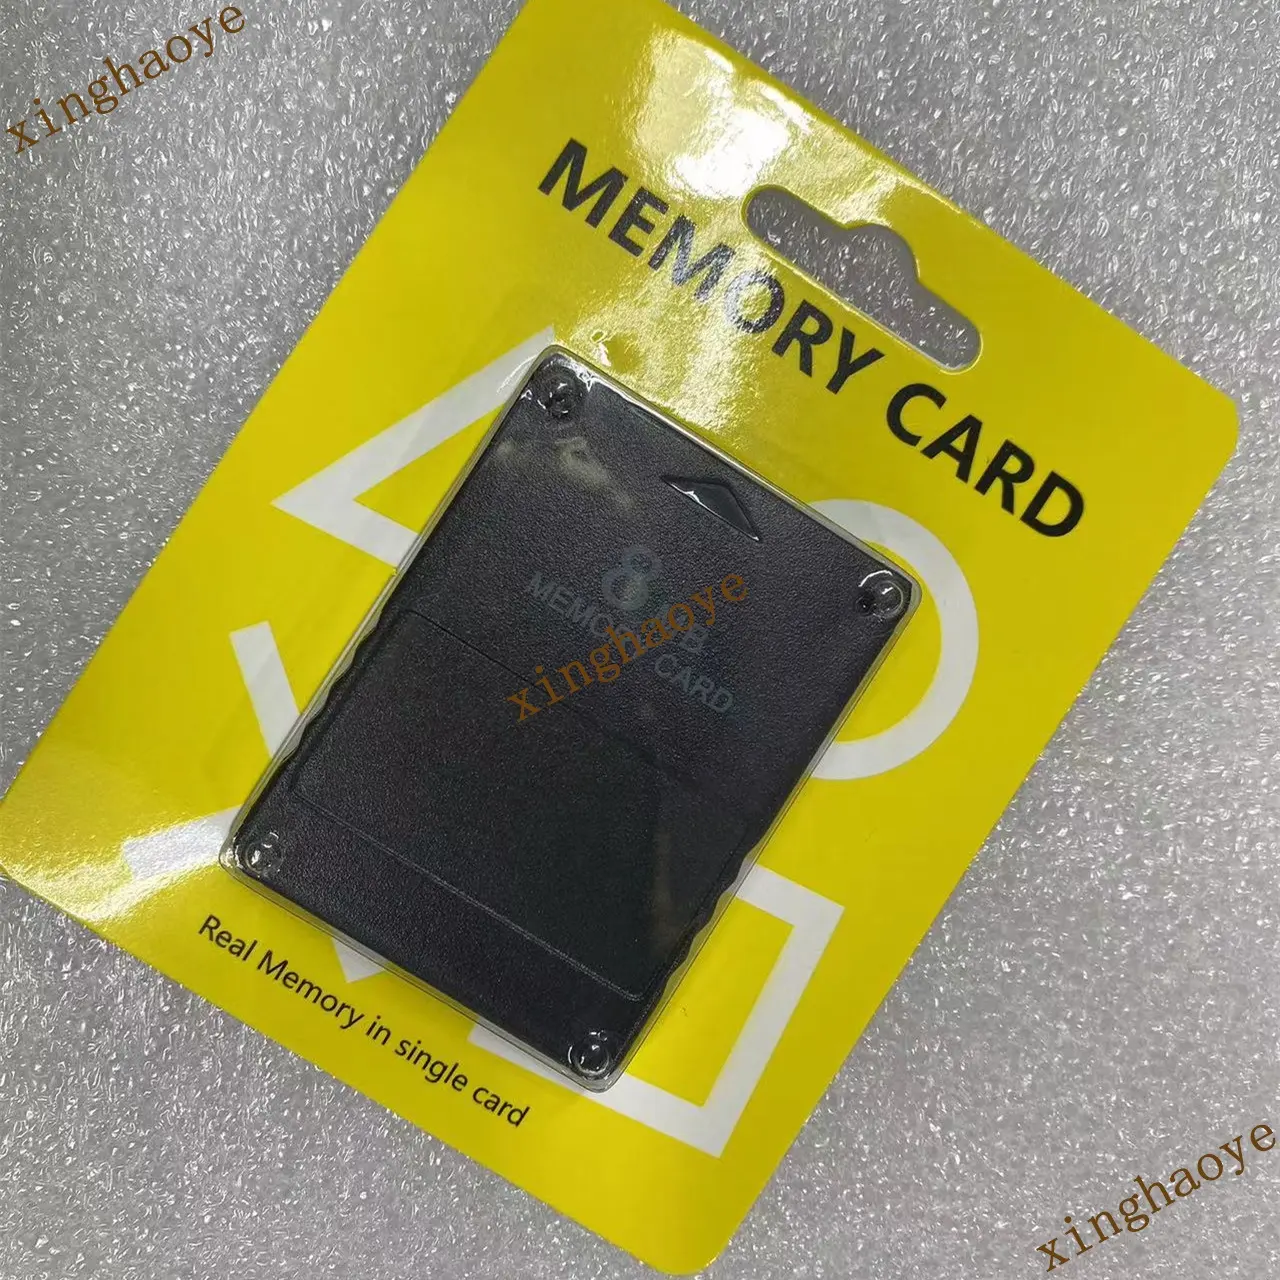 Memory card 8mb for PS2 console